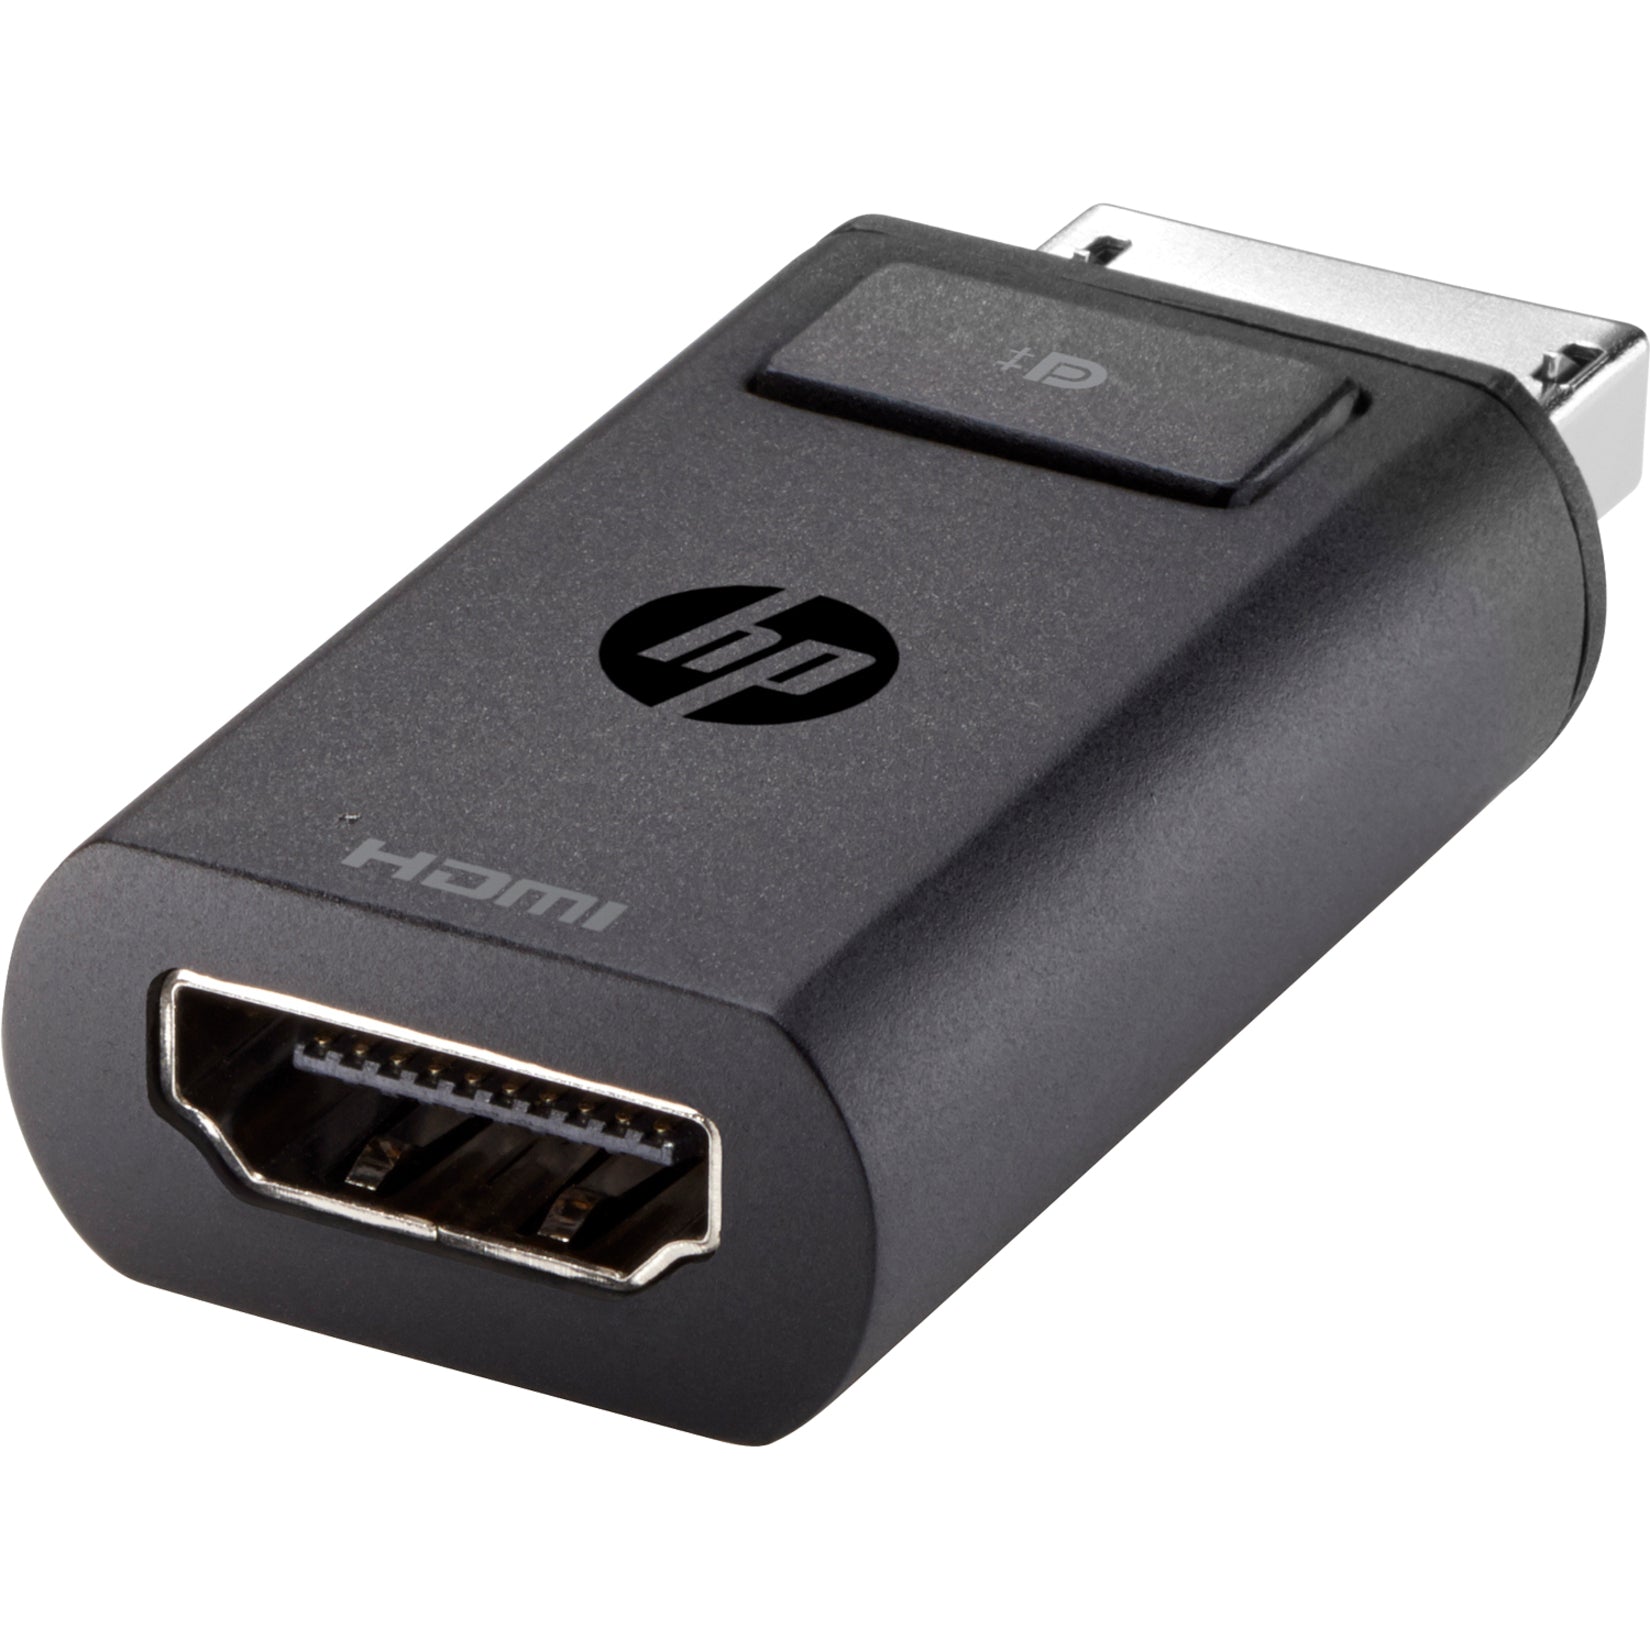 HP F3W43AA DisplayPort To HDMI 1.4 Adapter, Connect Your DisplayPort Device to an HDMI Display